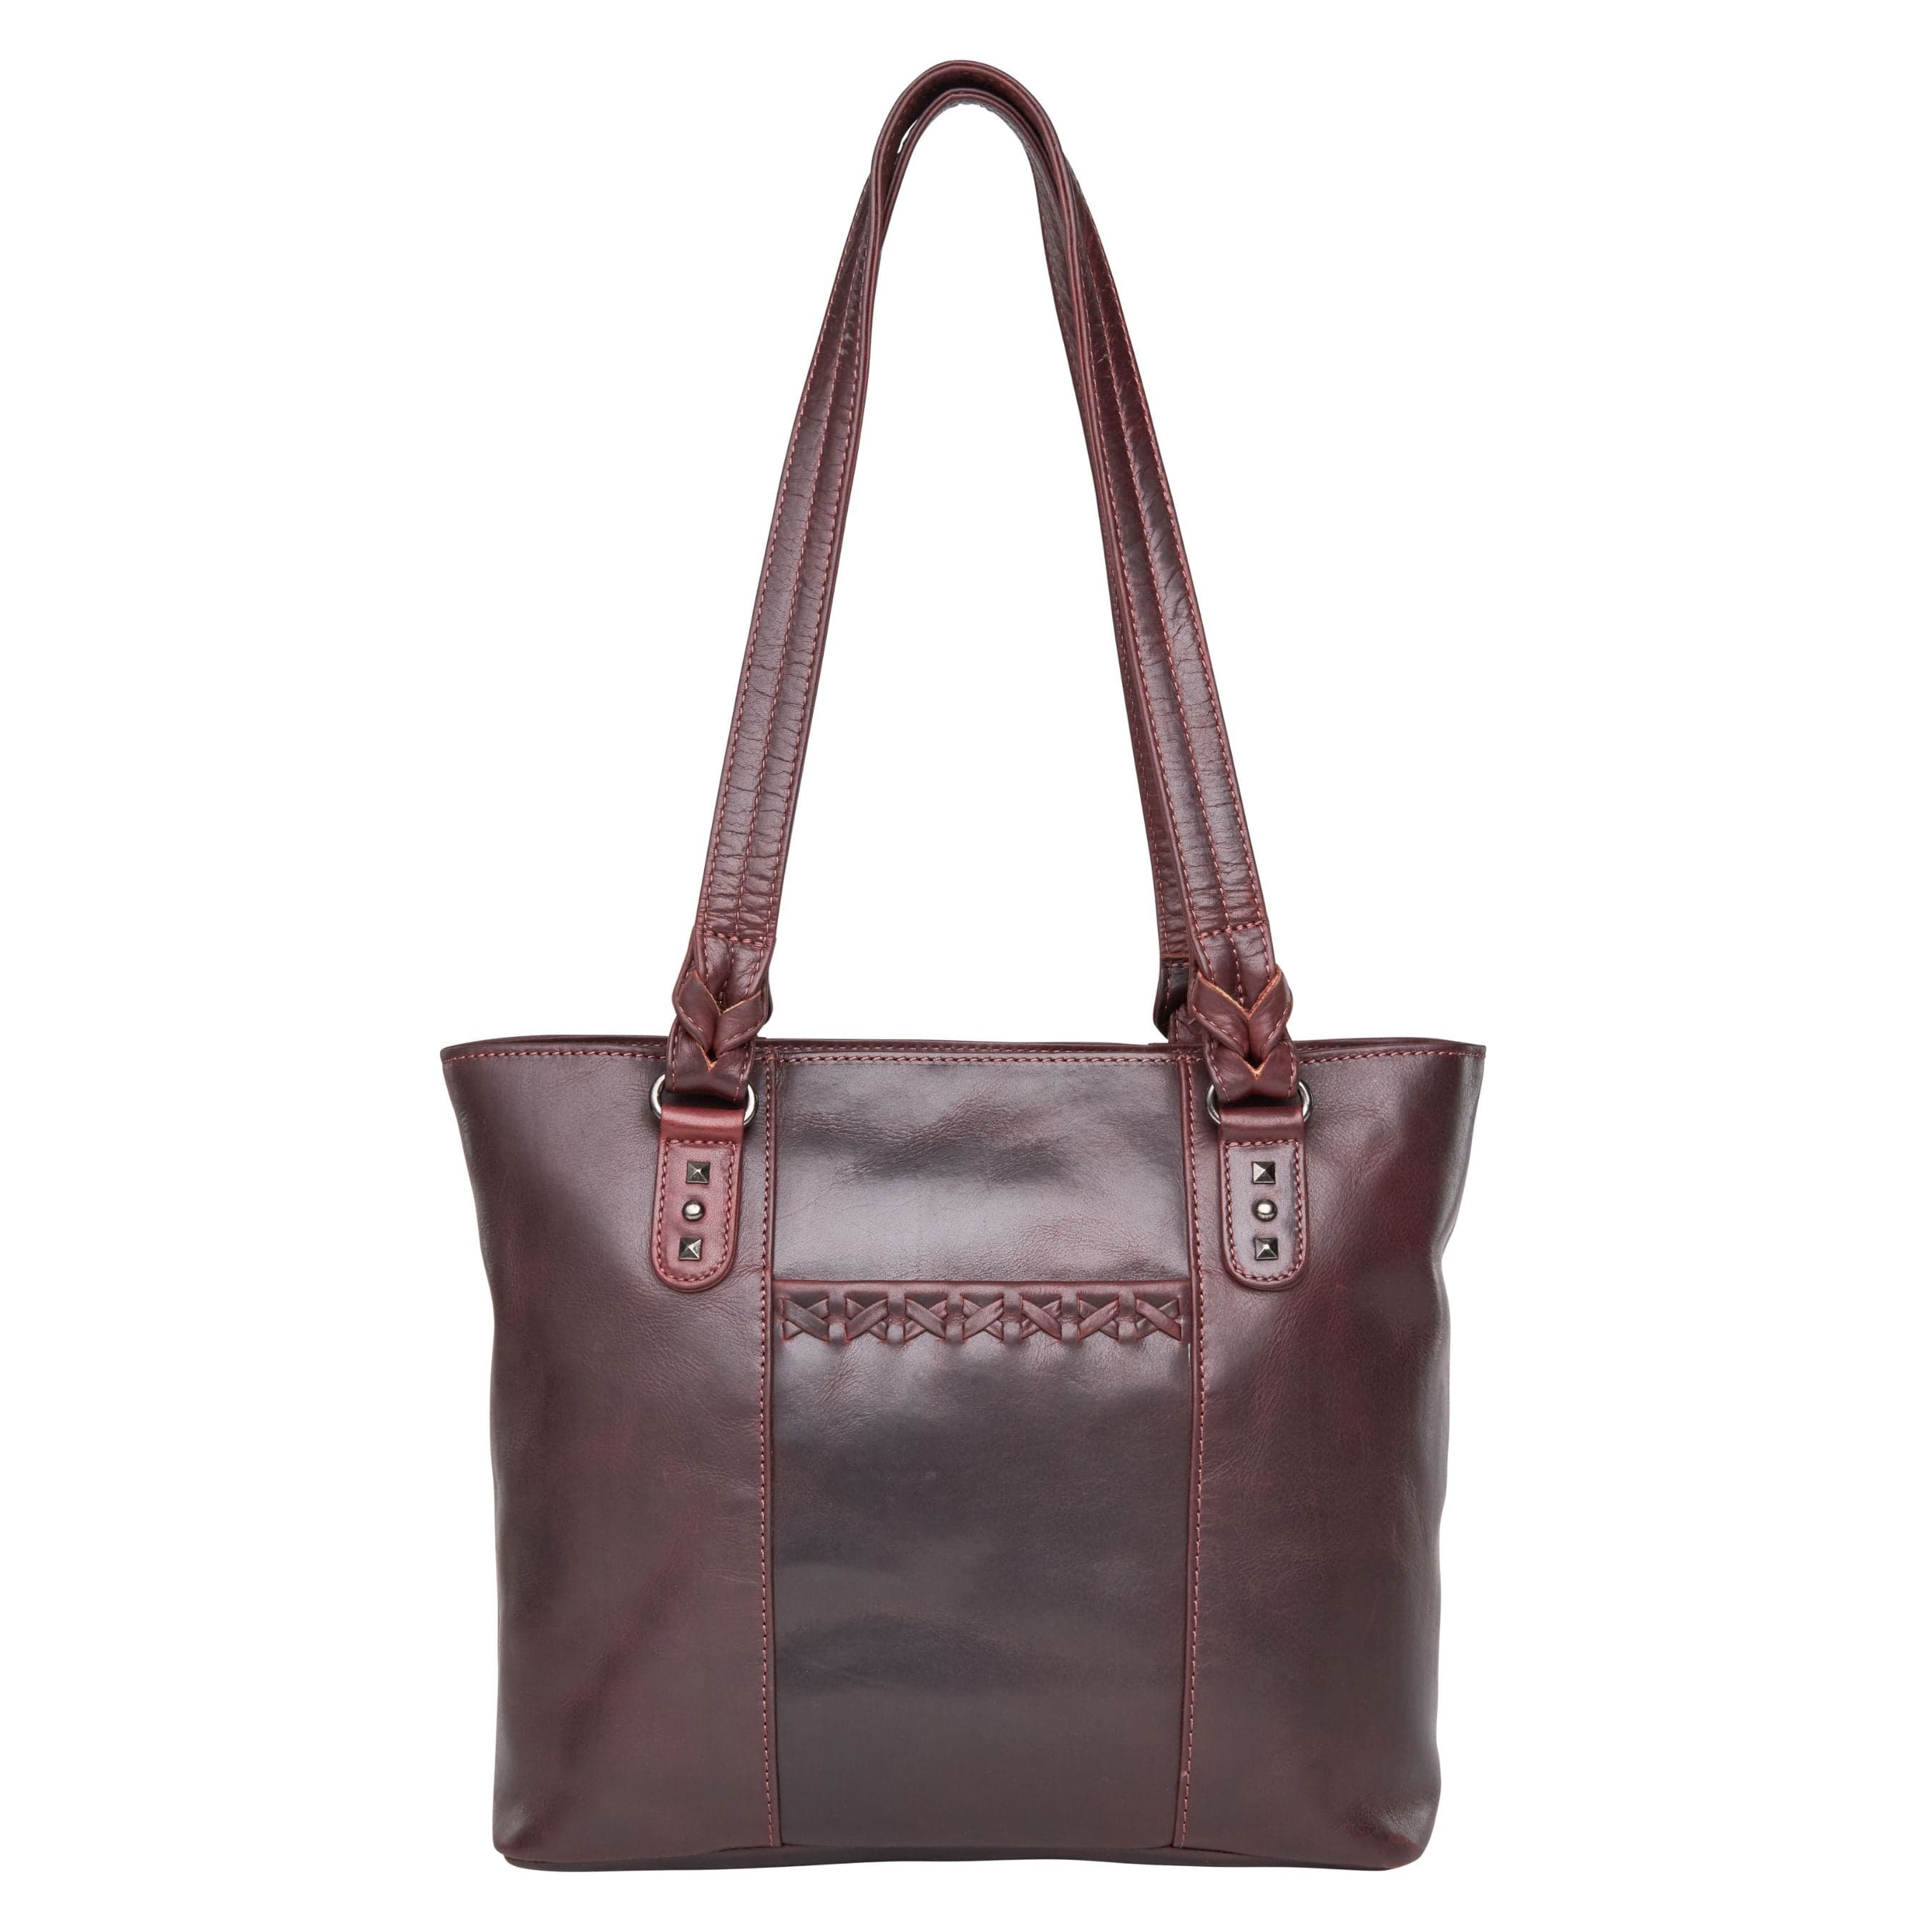 Concealed Carry Peyton Leather Tote for Women Lady Conceal -  YKK Locking & Universal Holster -  Designer Luxury Leather Carry Handbag -  carry Handbag for gun carry -  Unique Tote gun Handbag -  designer backpack purse -  designer purse sale -  designer purse sales -  womens designer purse sale -  Peyton Leather Tote -  designer lady purse concealed carry gun Handbag -   concealed carry Handbag for woman-  Easy Conceal Carry and Draw Purse - 